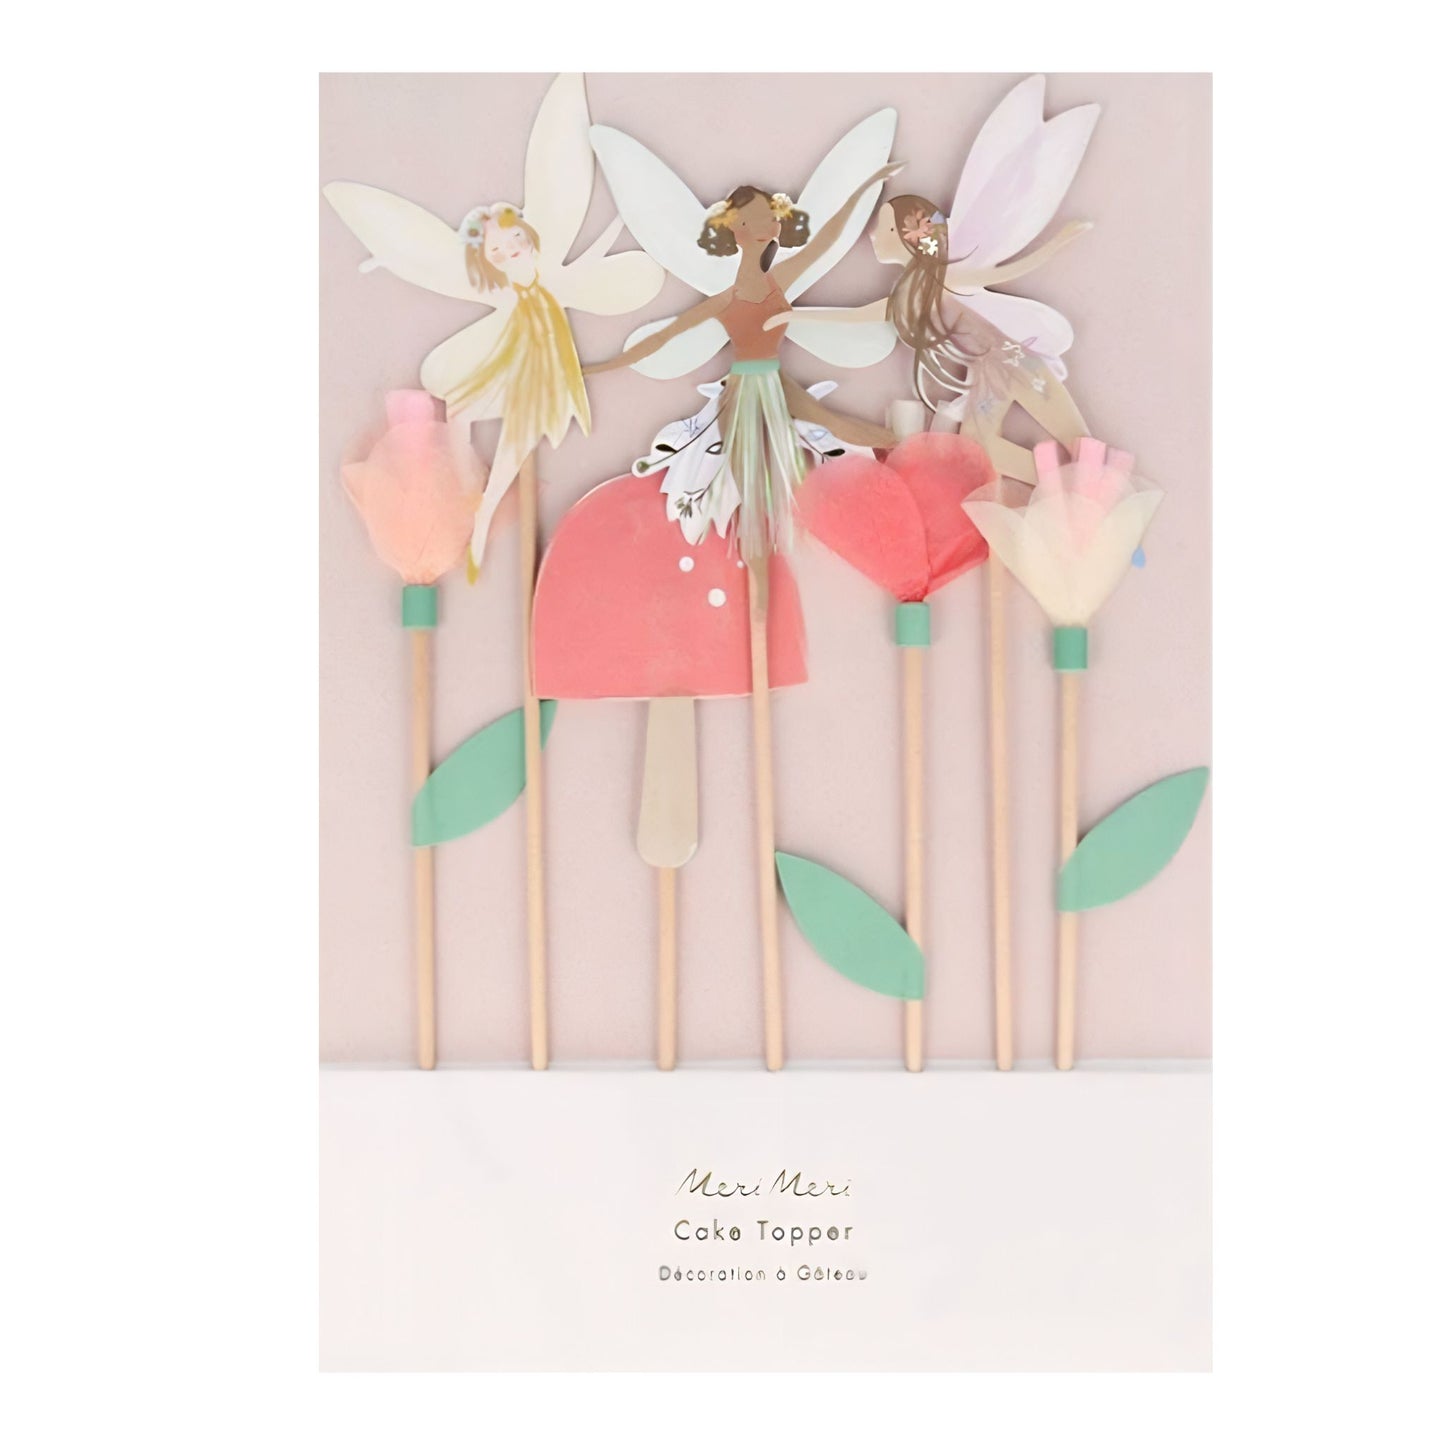 Simply stunning Fairy cake toppers by Meri Meri in 7 different designs. Eco Friendly